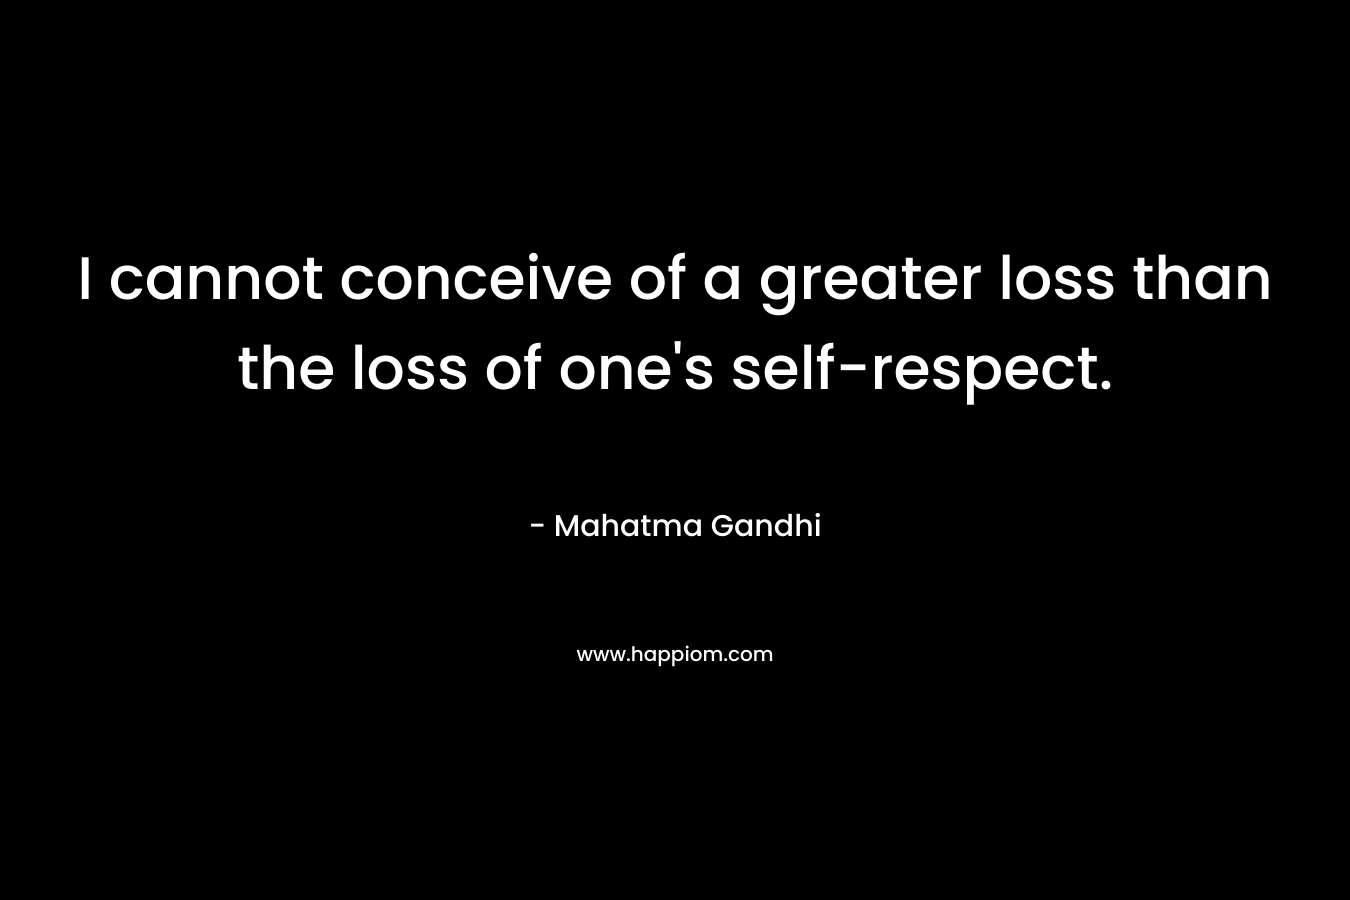 I cannot conceive of a greater loss than the loss of one's self-respect.